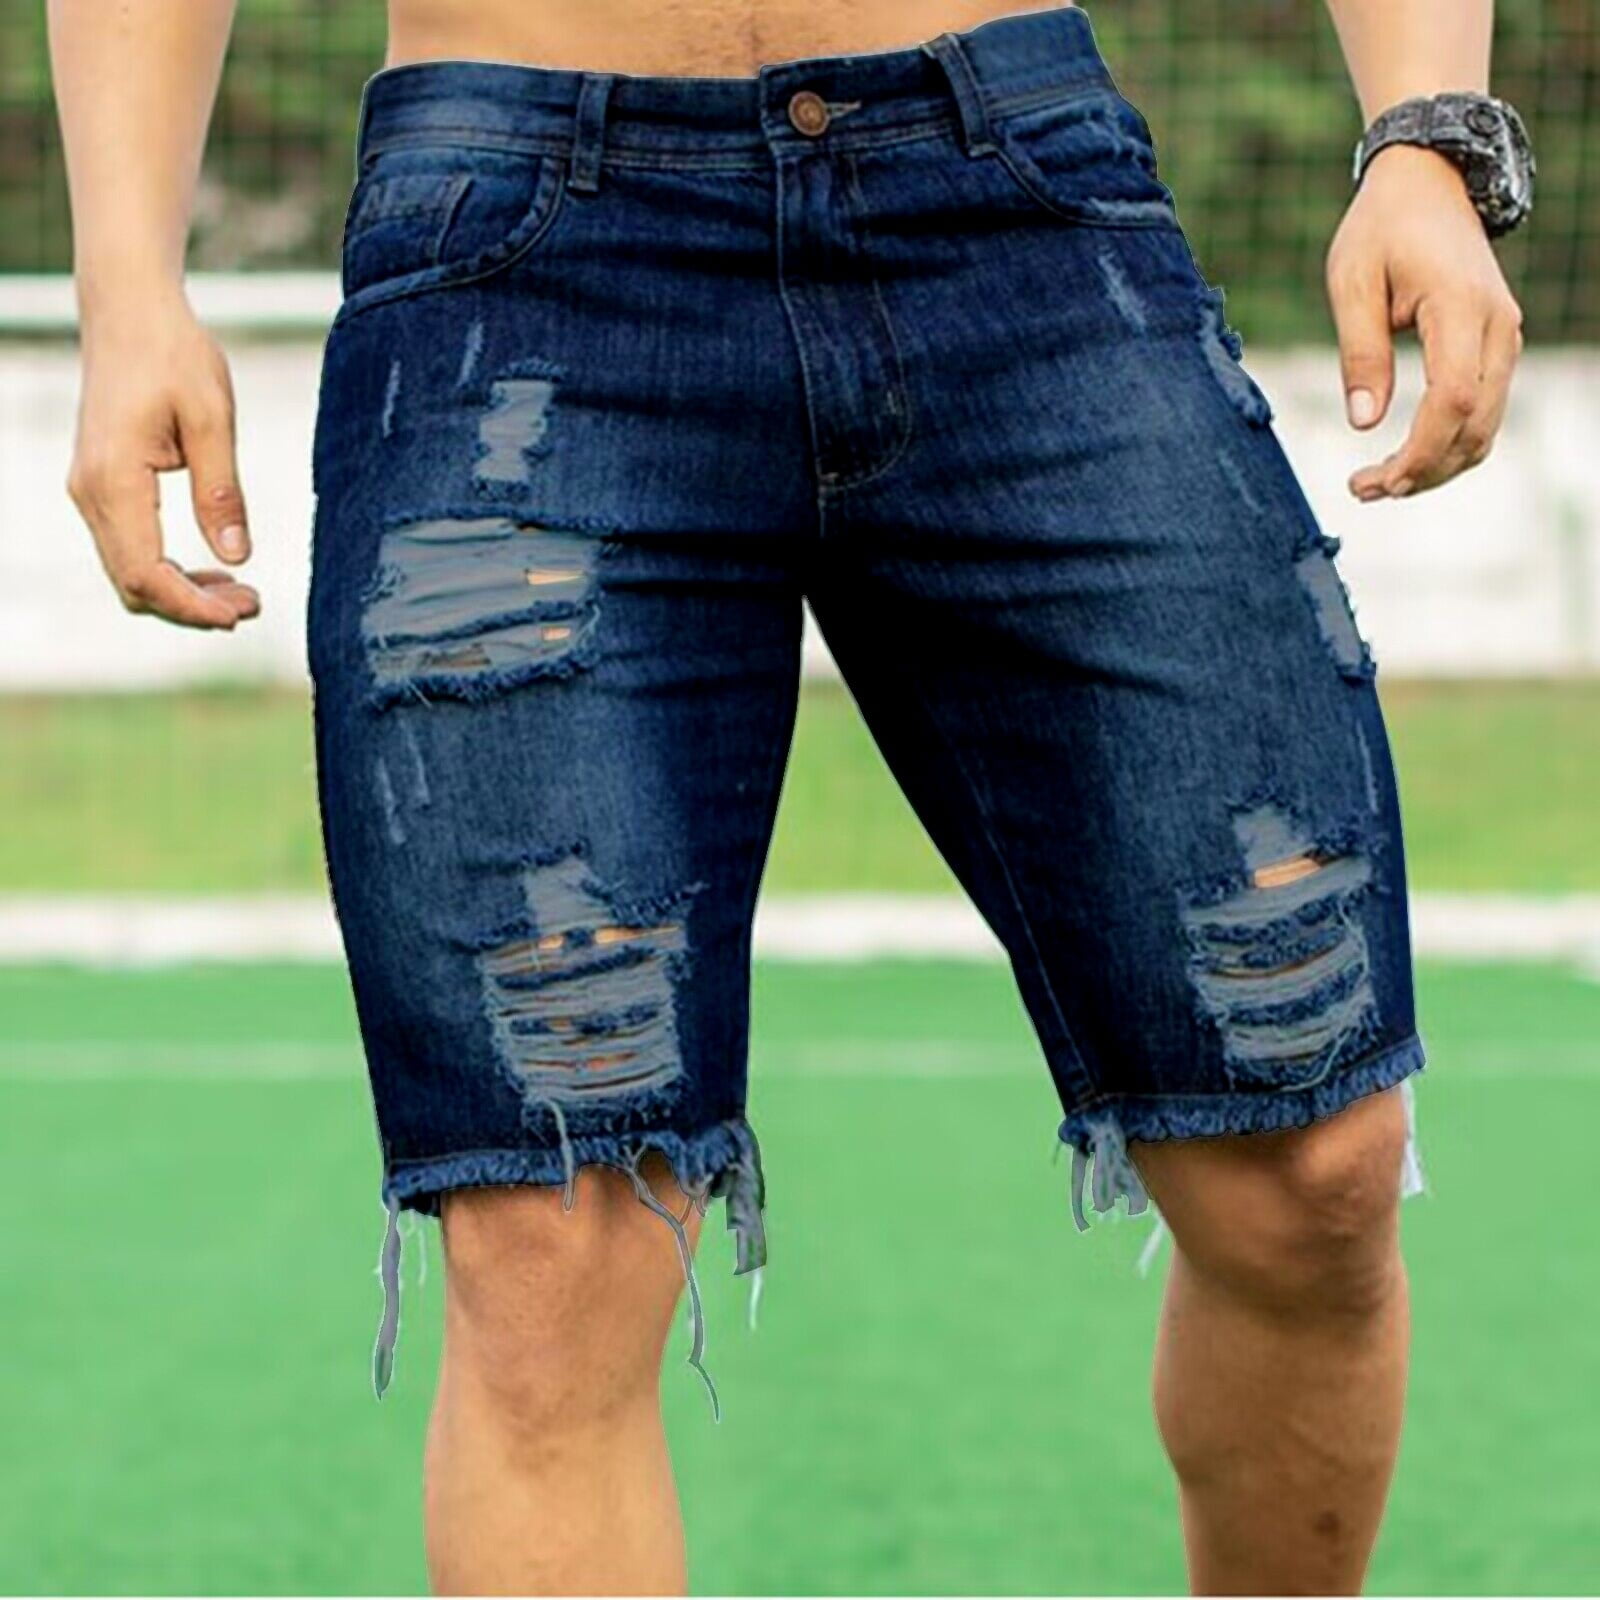 Black Denim Shorts with Tobacco Bag Outfits For Men (2 ideas & outfits) |  Lookastic